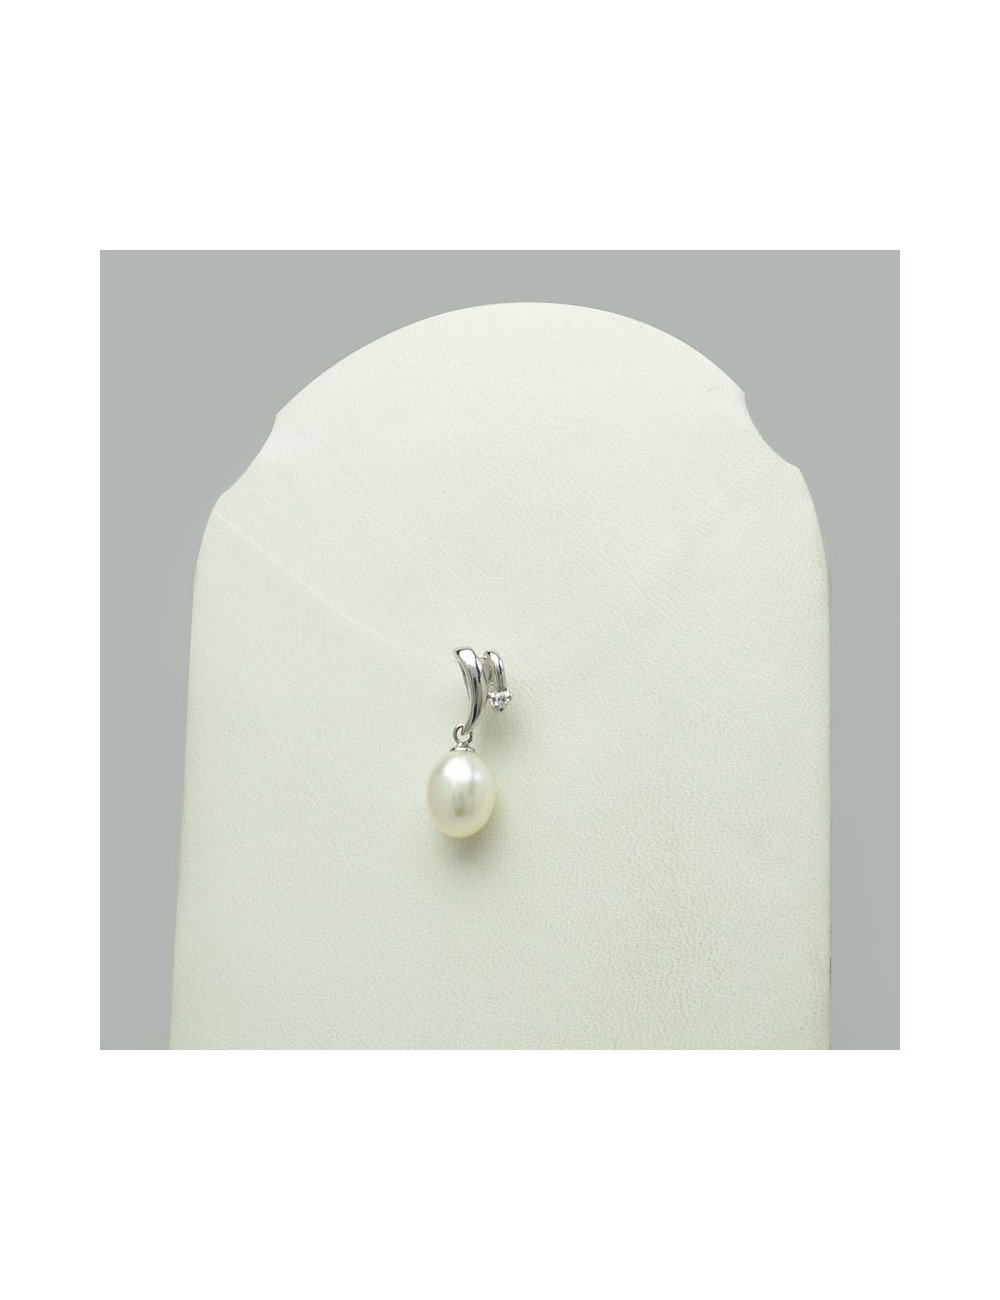 Silver pendant with freshwater pearl SP0018S